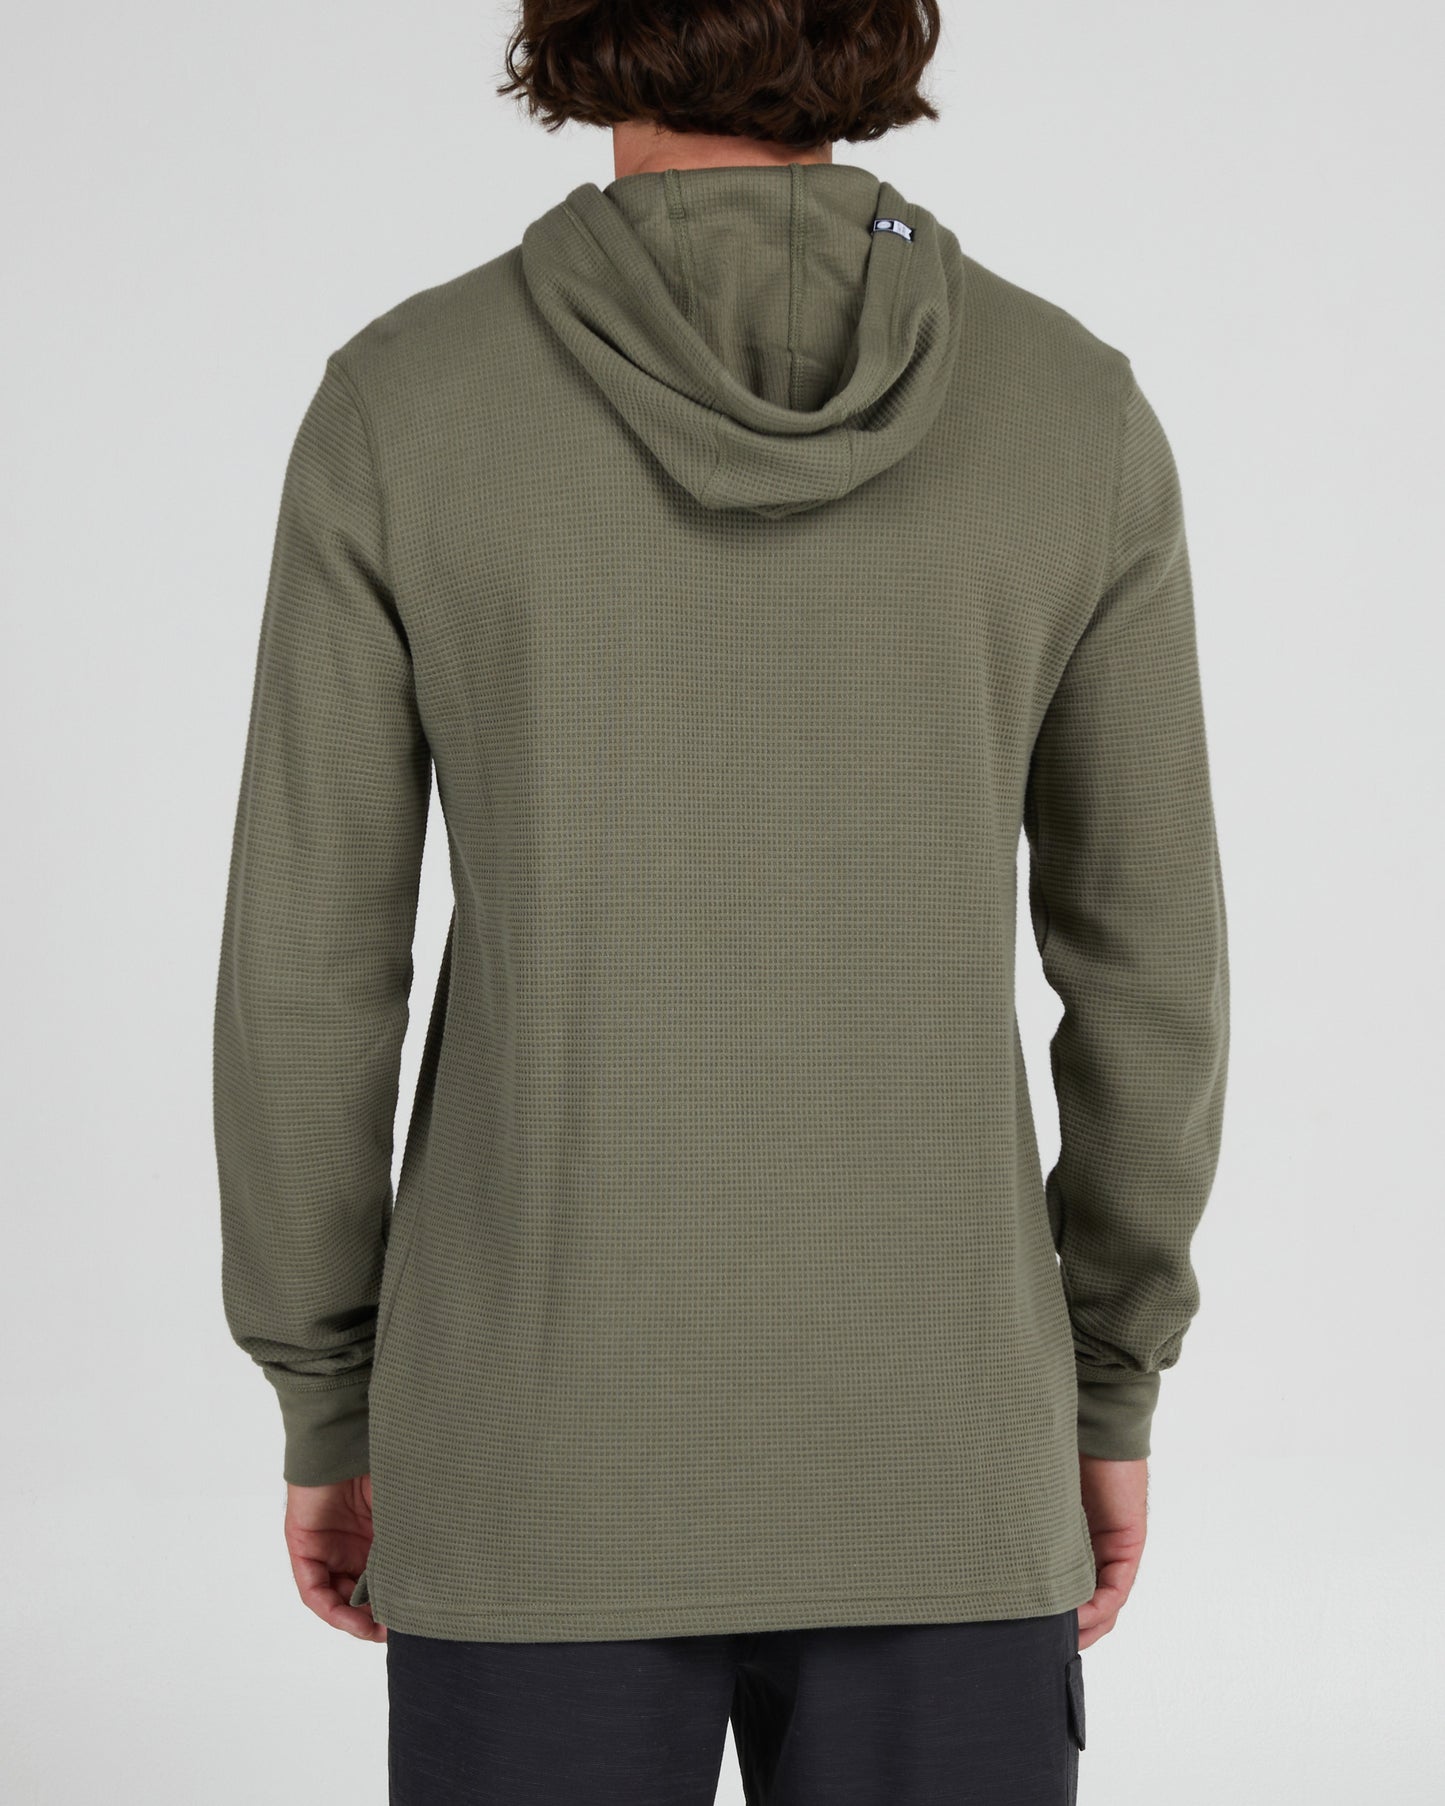 On body back of the Daybreak 2 Olive Hooded Thermal